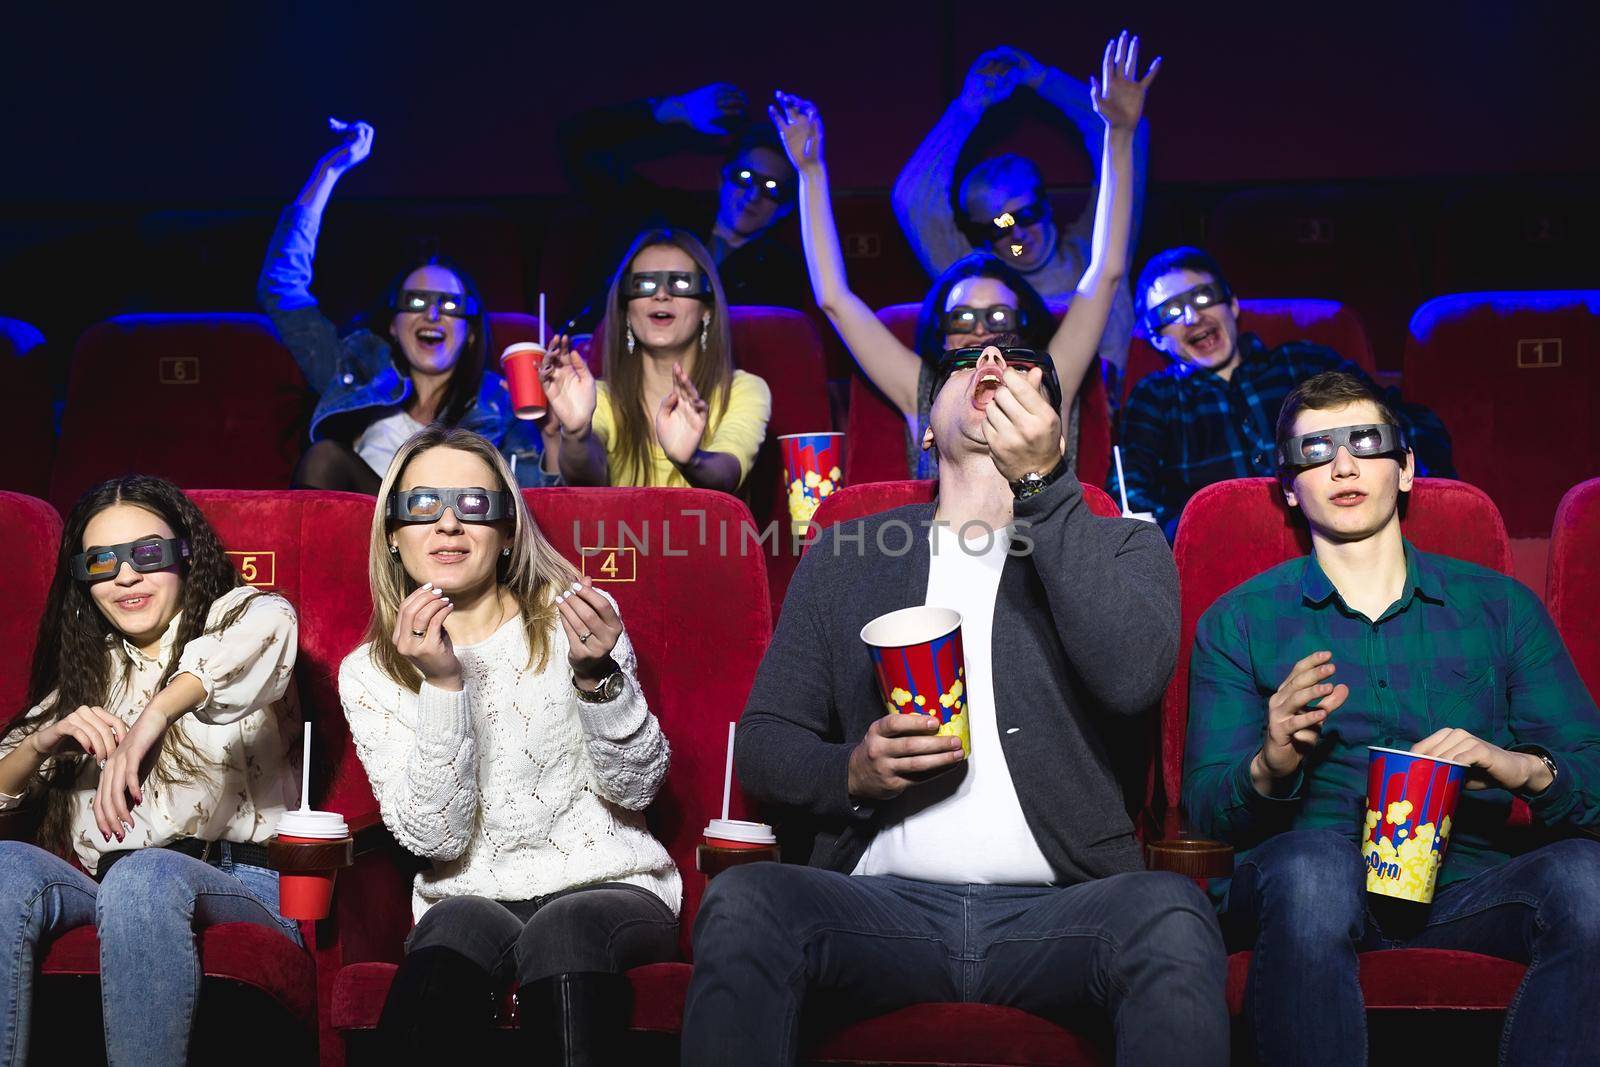 Friends in the cinema watch a funny movie with 3D glasses, laugh, have fun.